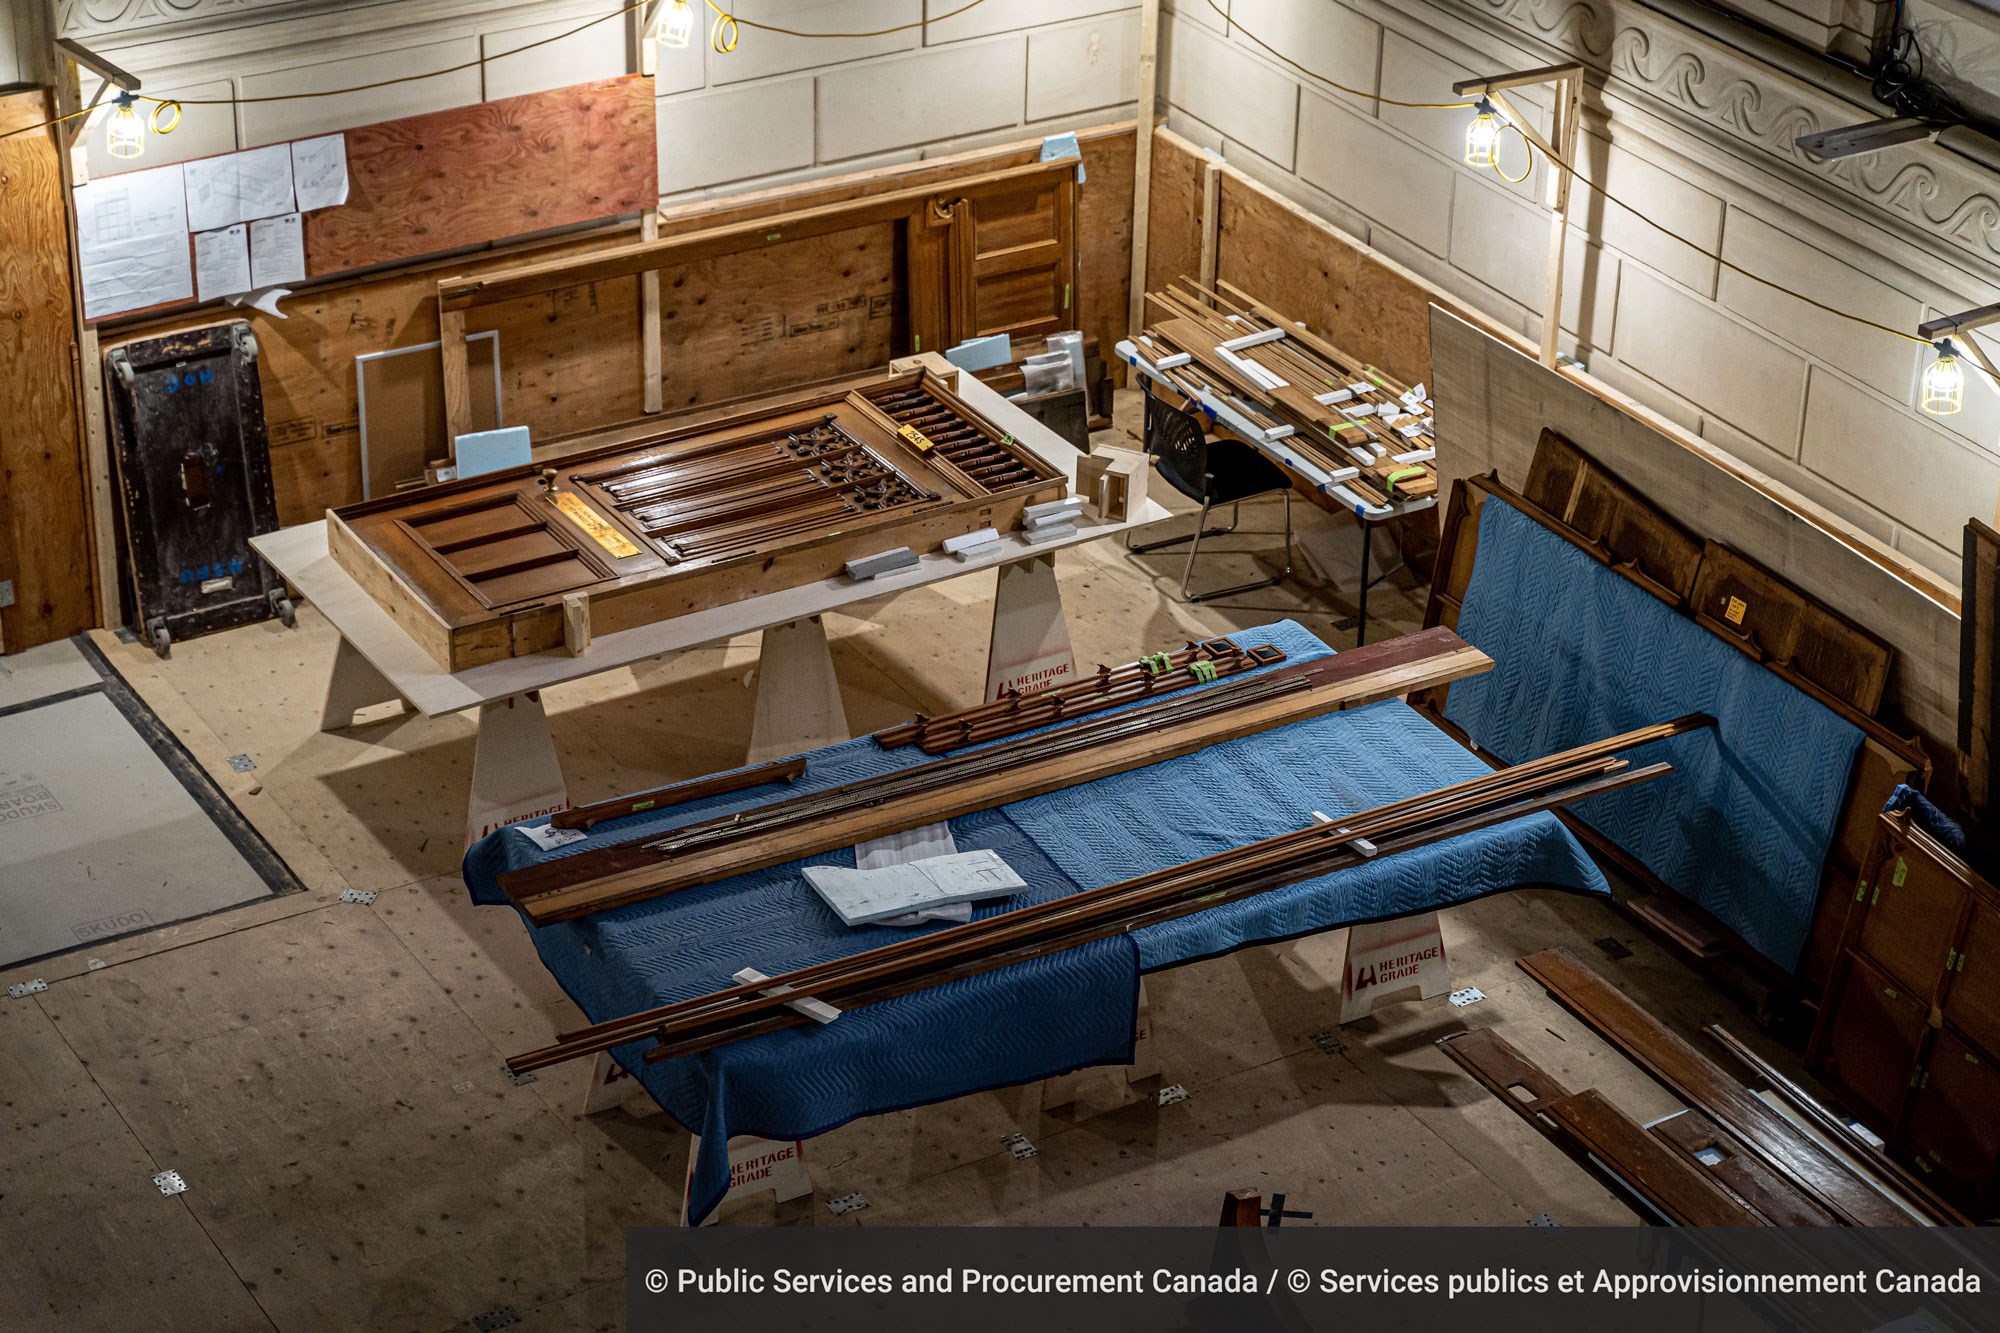 Once catalogued and dismantled, the removed woodwork is brought to a staging area so it can be protected by a packing team before its journey to a climate-controlled storage facility.